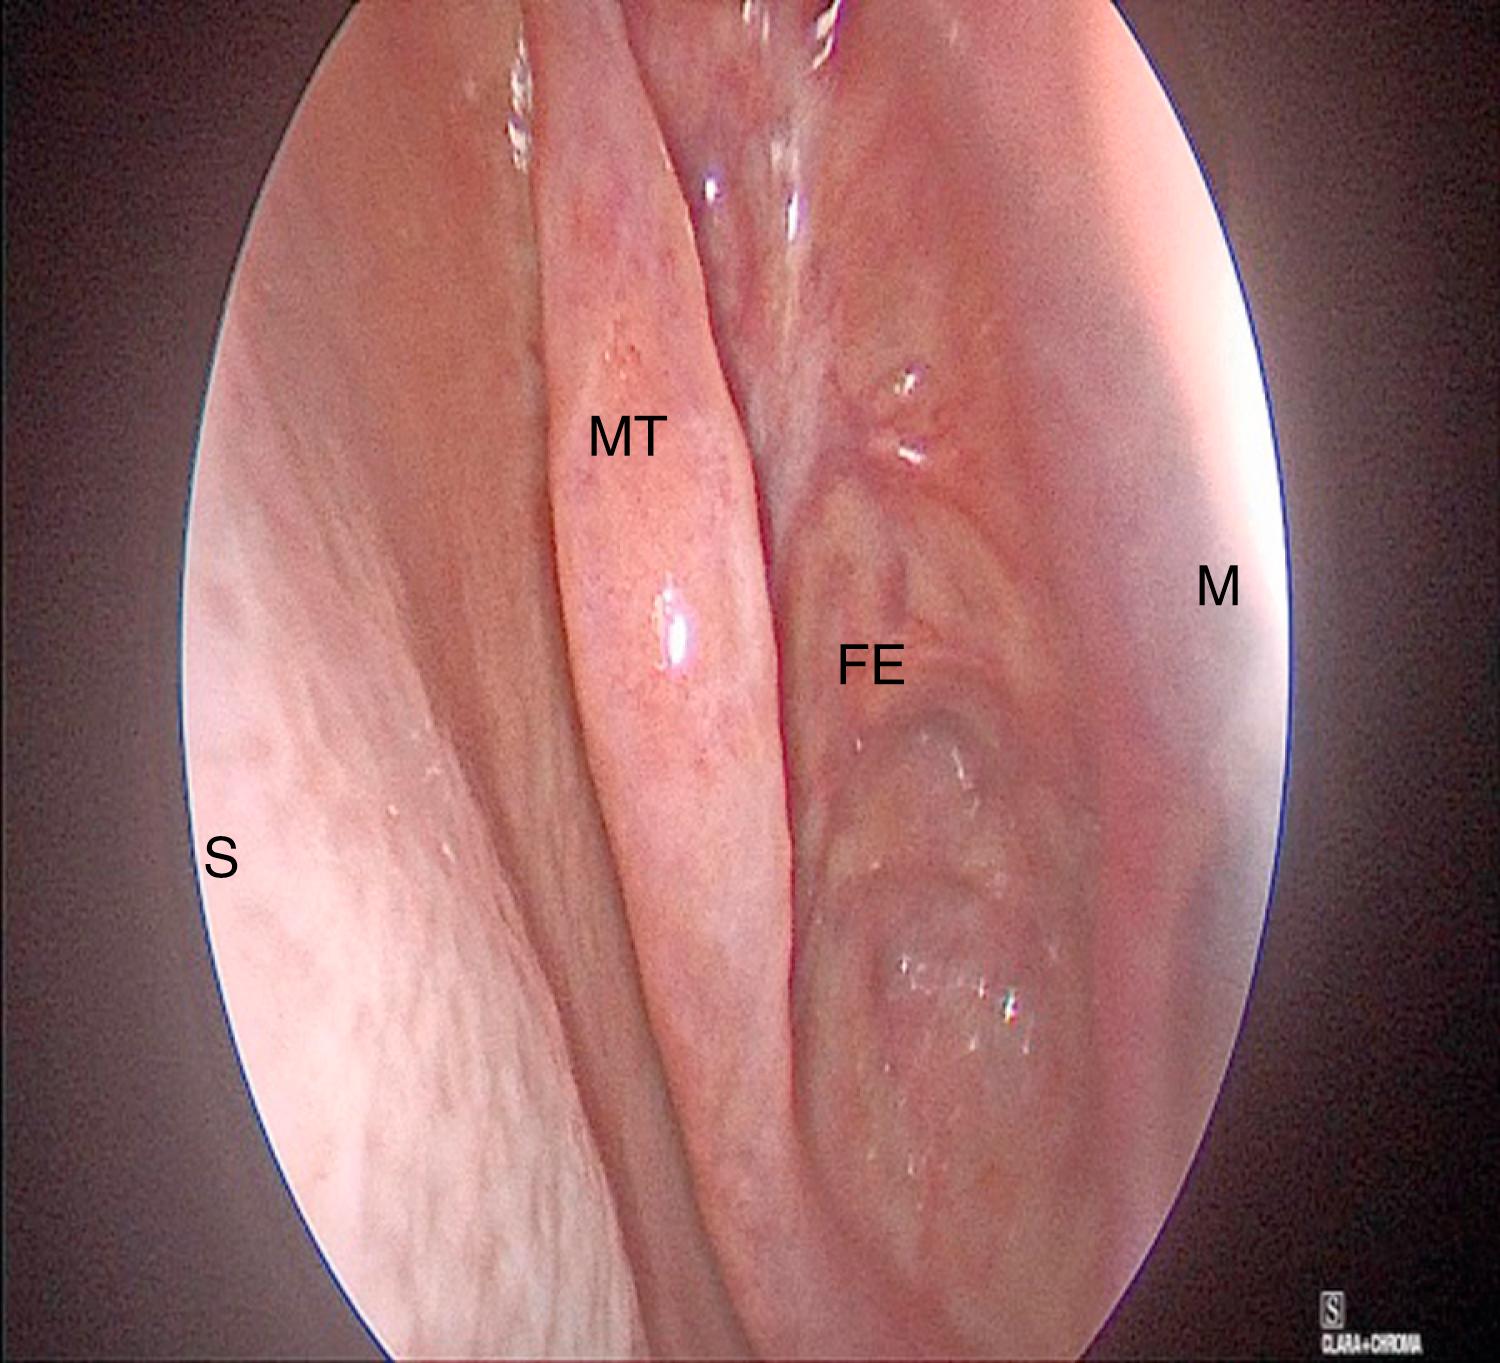 FIGURE 12.4, Endoscopic view of fovea ethmoidalis. The roof of the ethmoid sinus is formed by the orbital plate of the frontal bone medial to the cribriform sinus. (S) Septum, (MT) middle turbinate, (FE) fovea ethmoidalis, and (M) maxillary sinus.